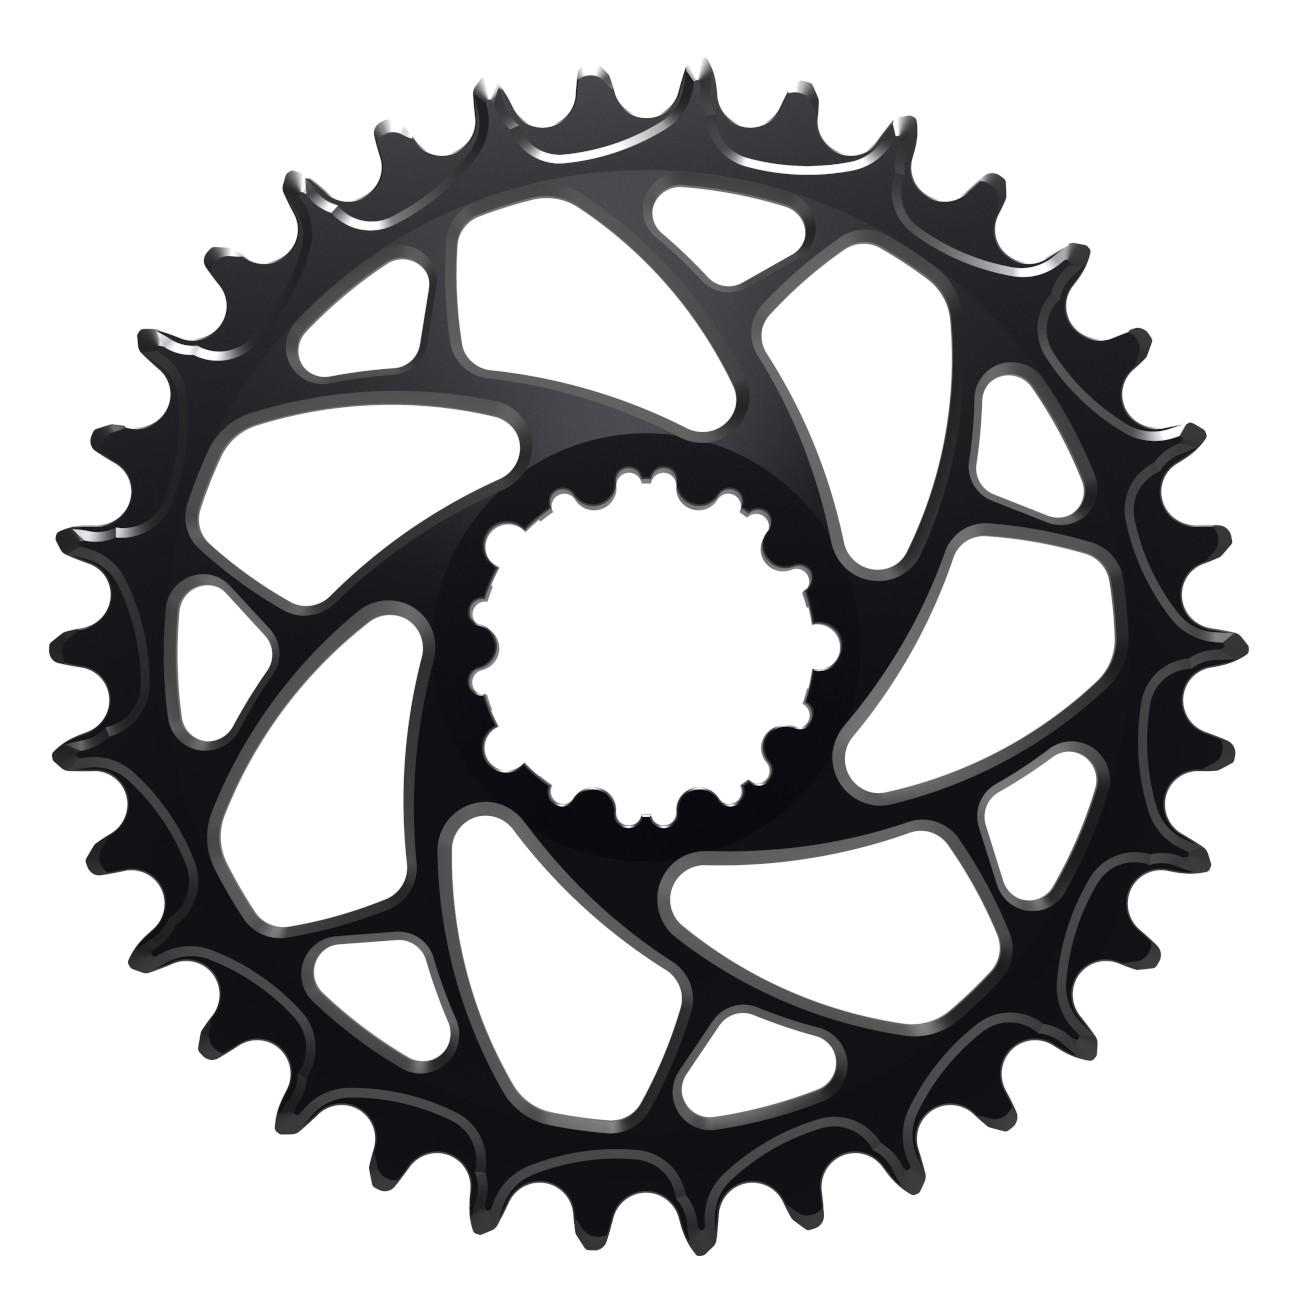 Productfoto van Alugear ELM Narrow Wide Boost Chainring - for 1x SRAM 3-Bolt Direct Mount